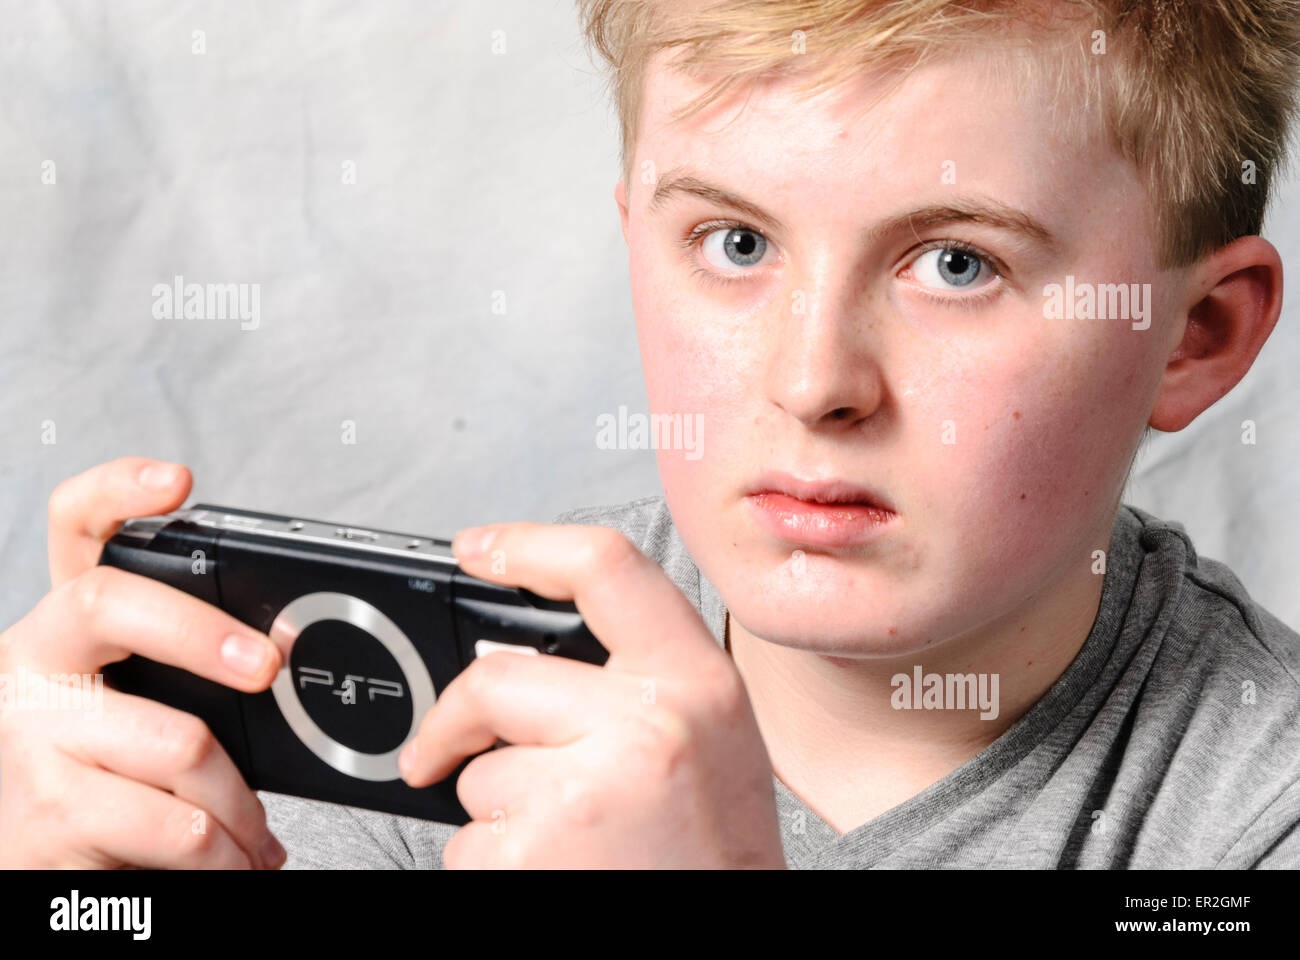 Young boy playing a Sony PSP handheld video game. Stock Photo